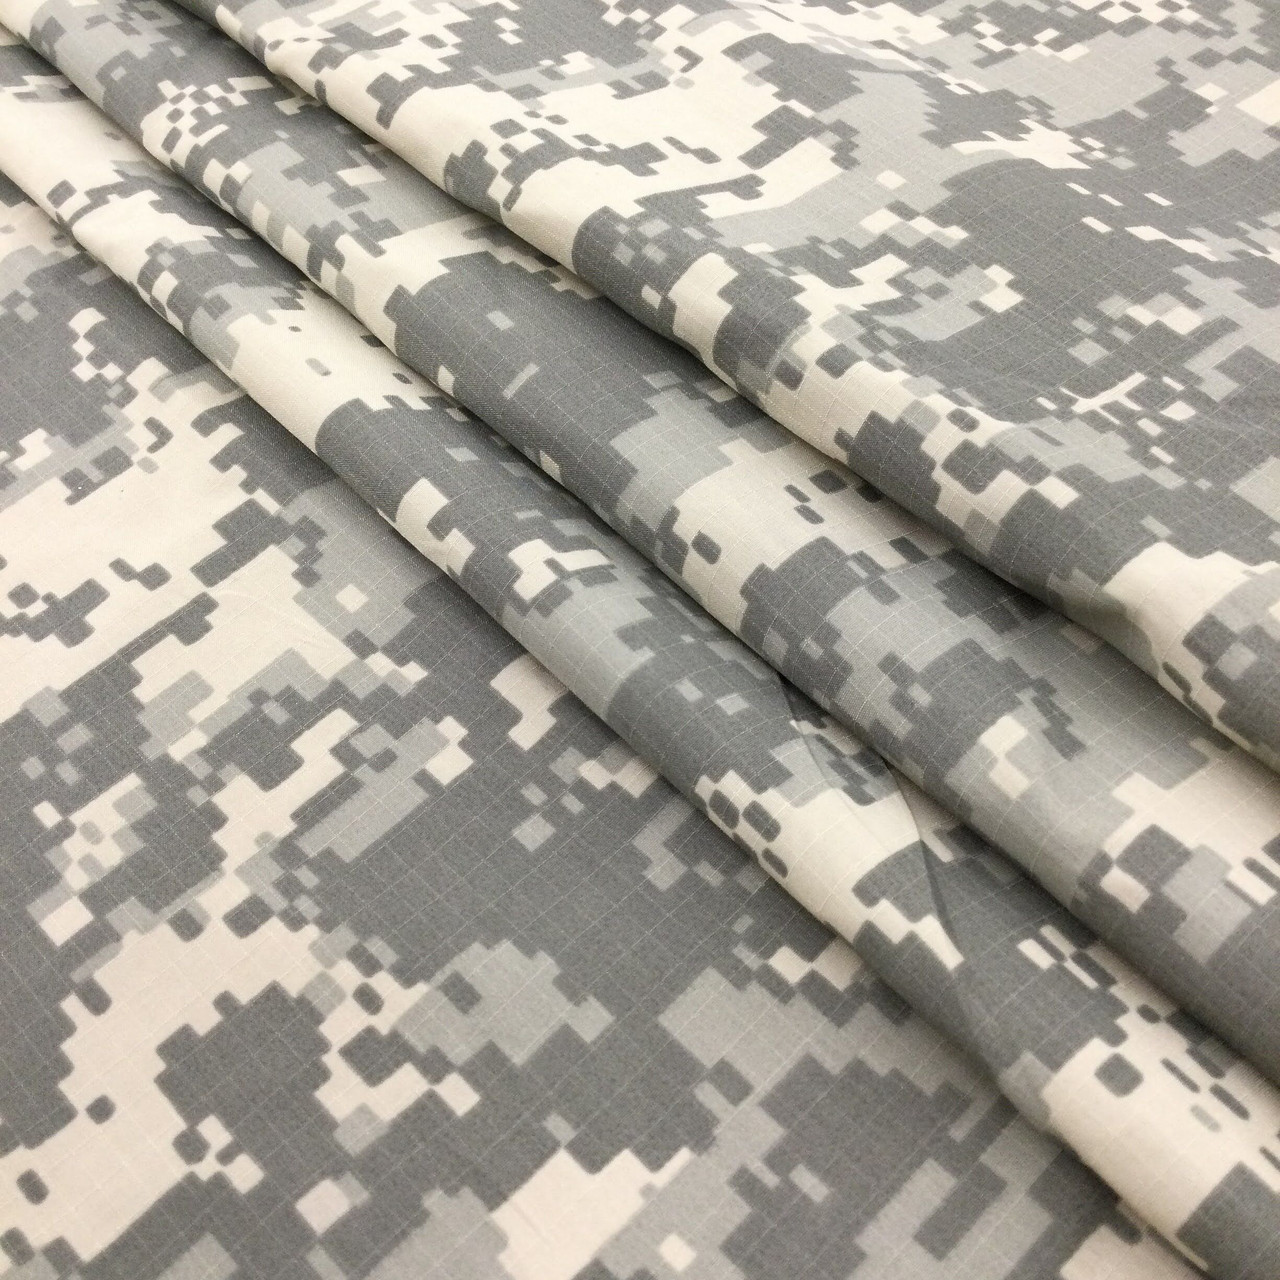 Desert - Camo Ripstop Army Military Camouflage Fabric Material - 59/150cm  wide - Rip-Stop